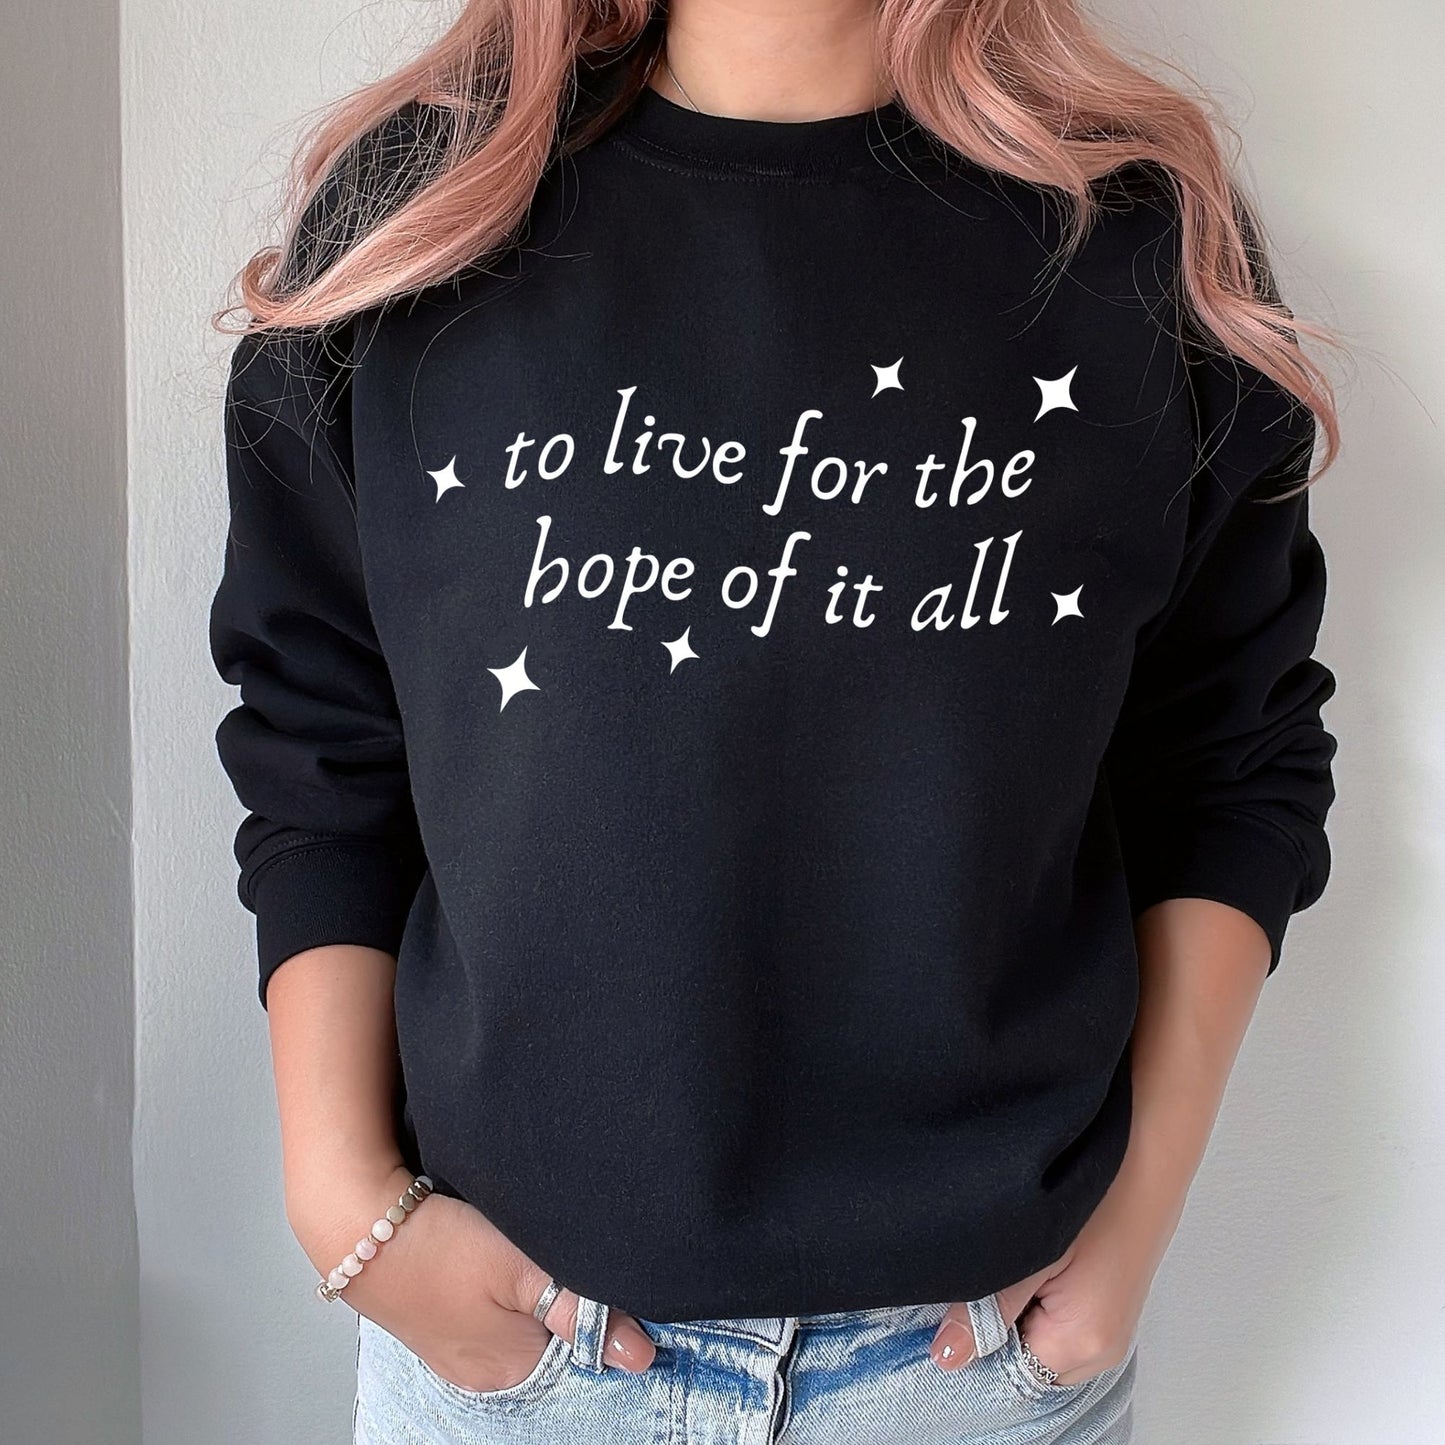 To Live for the Hope of It All Crewneck Sweatshirt | Taylor Swift Folklore Sweatshirt